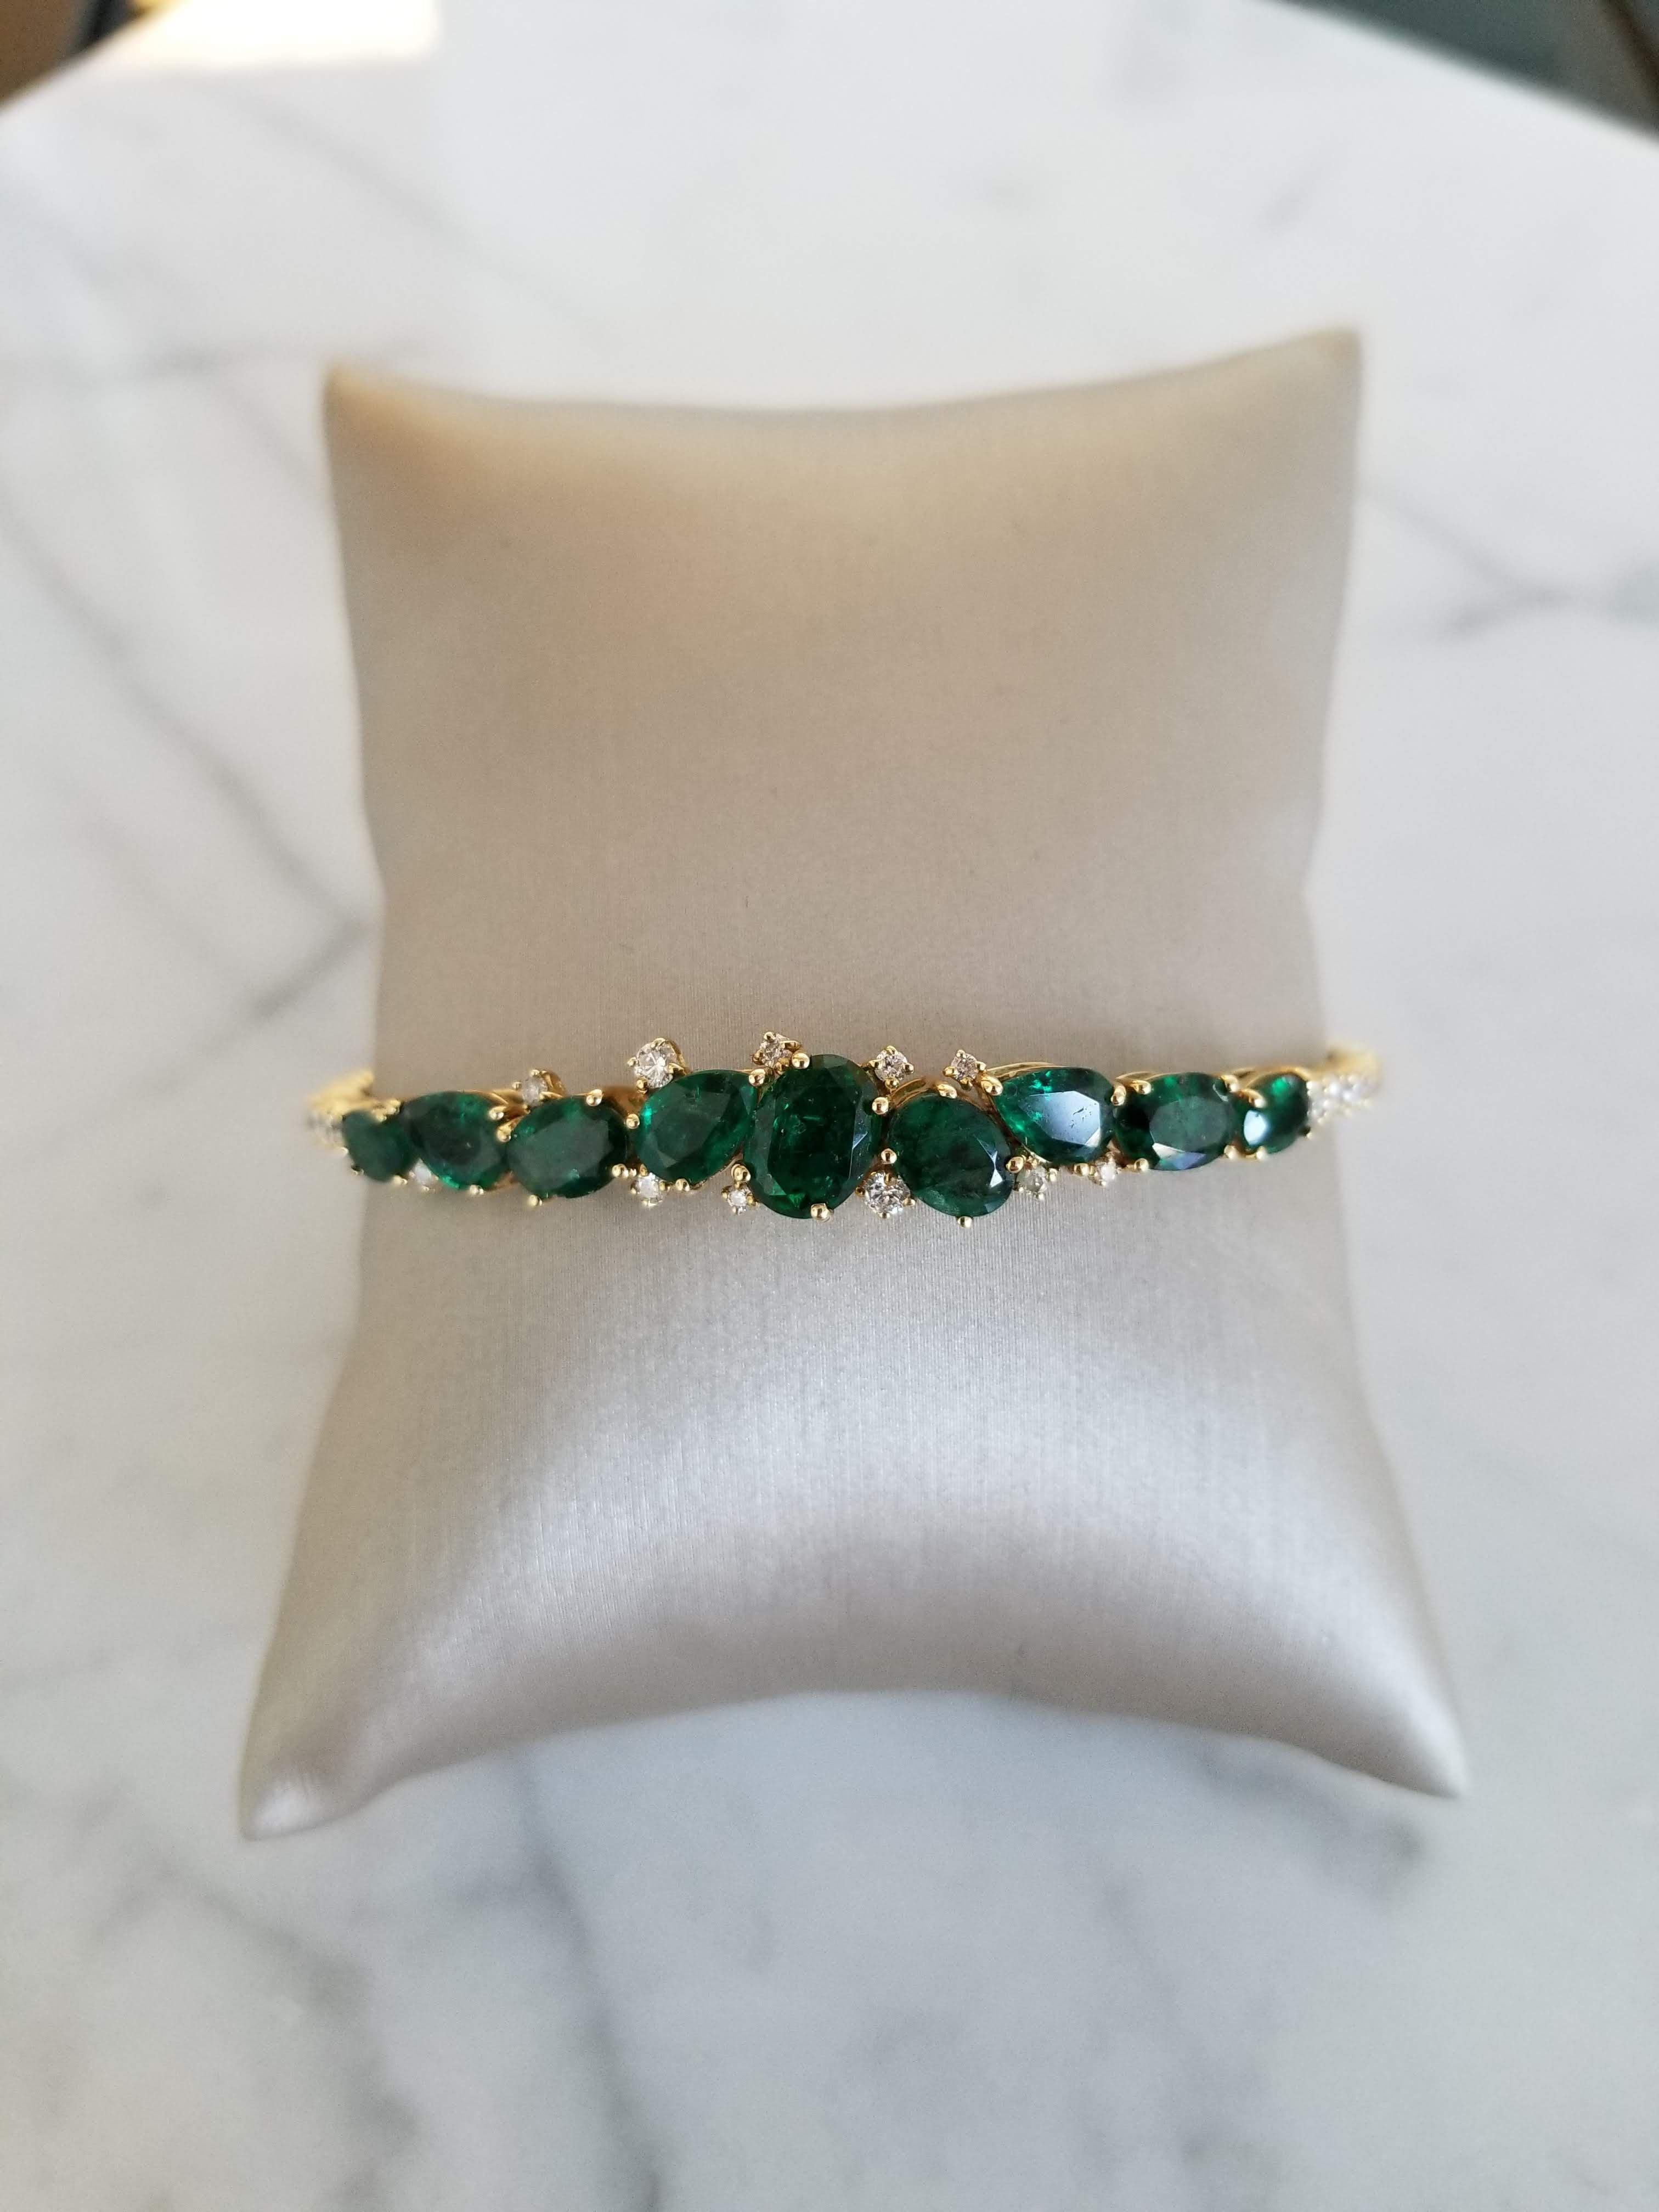 Flexible Diamond and Green Emerald Bracelet that can be dressed up and down! 
Fall in love with this beautiful piece!